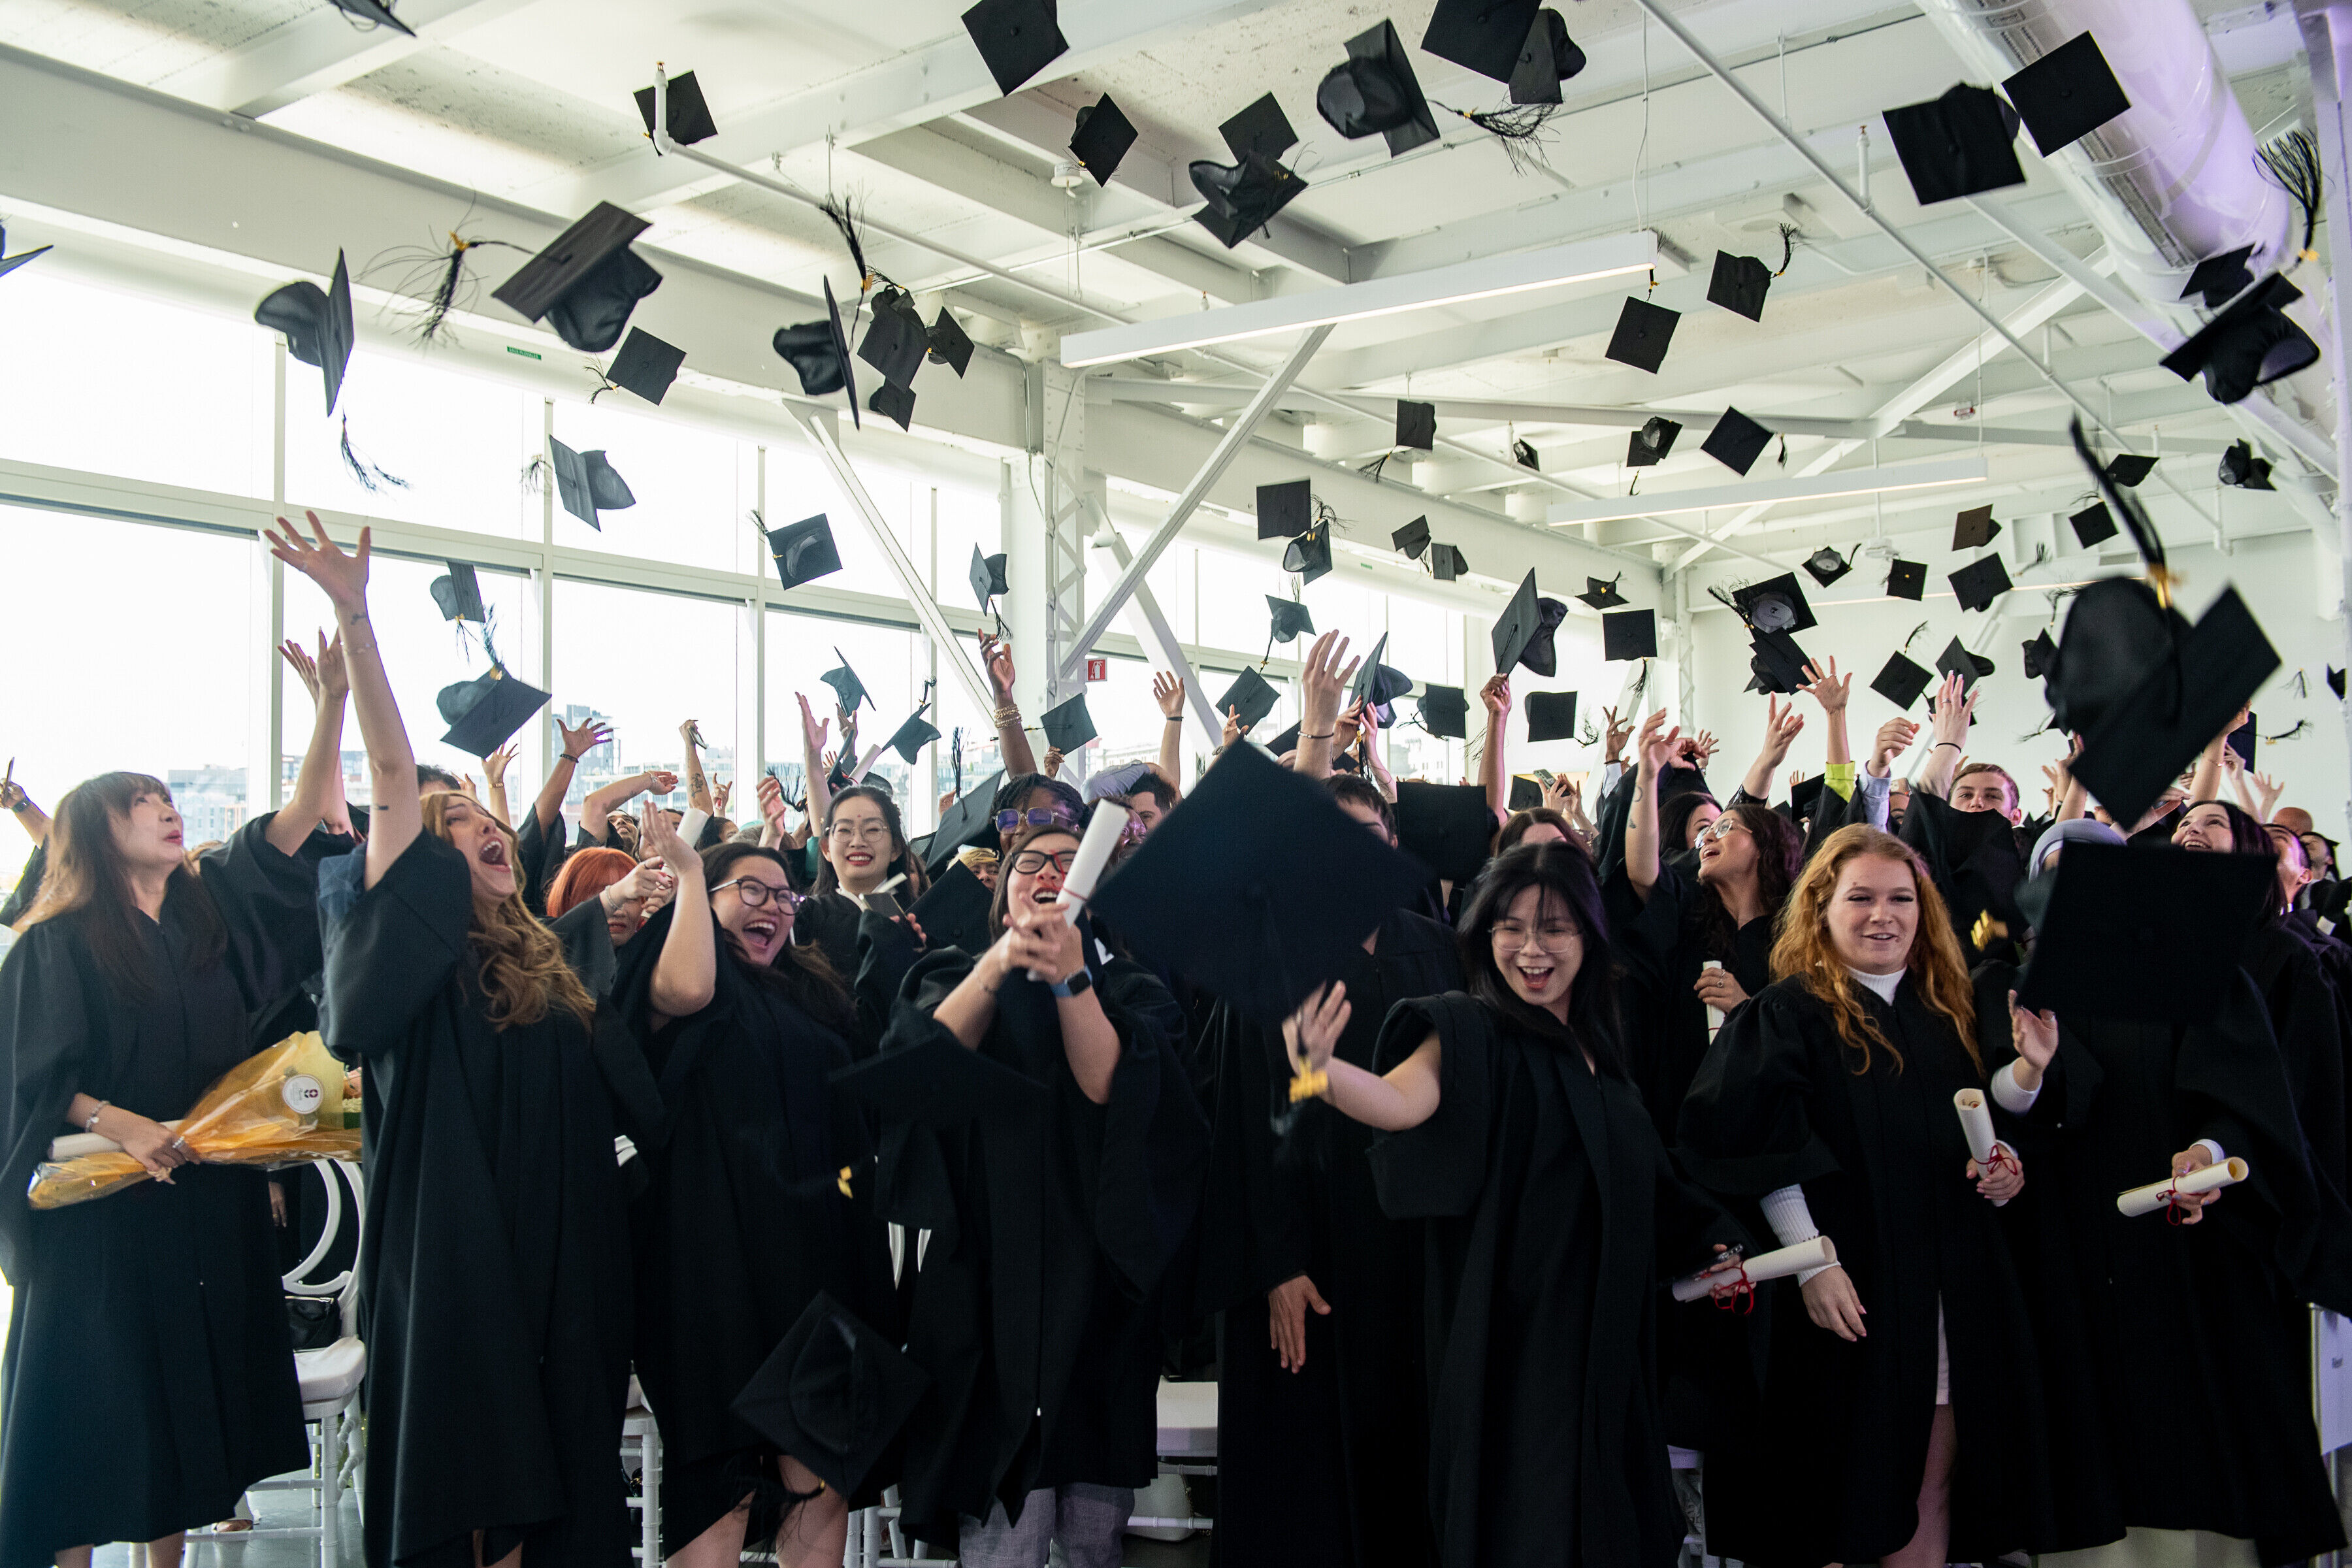 A group of jubilant graduates in black gowns and caps celebrating, tossing their caps into the air in a bright hall.